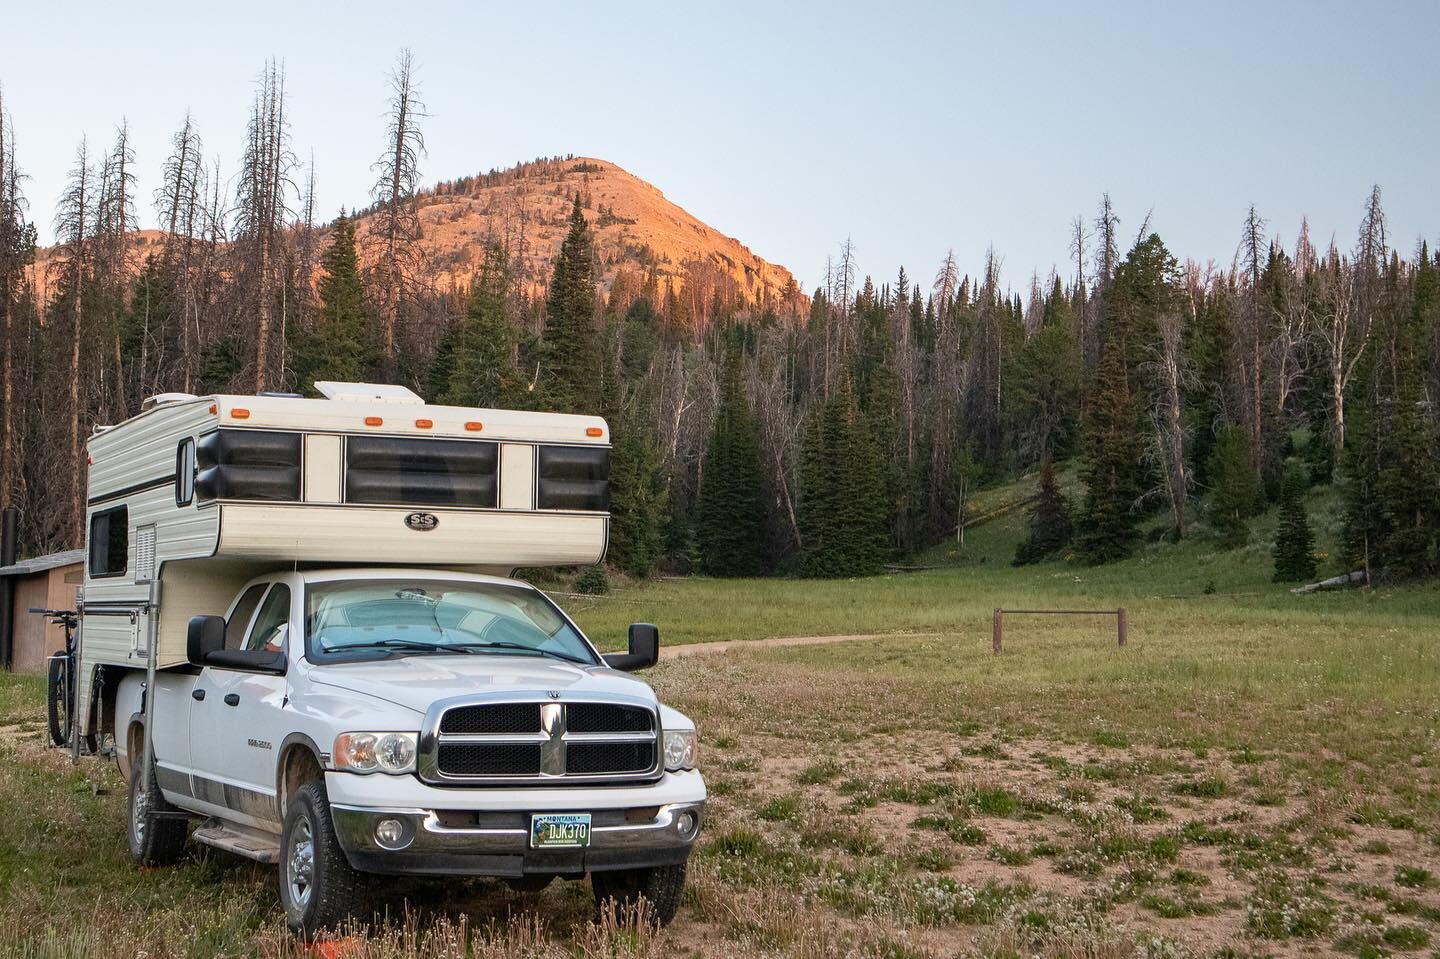 Do you have plans for a Labor Day getaway?  We are busy formulating ours!  Under consideration is a quick trip to Glacier National Park, a trip to Beartooth Pass, or something else.  What are you up to for this long weekend?  Meadow and Lark are fuel